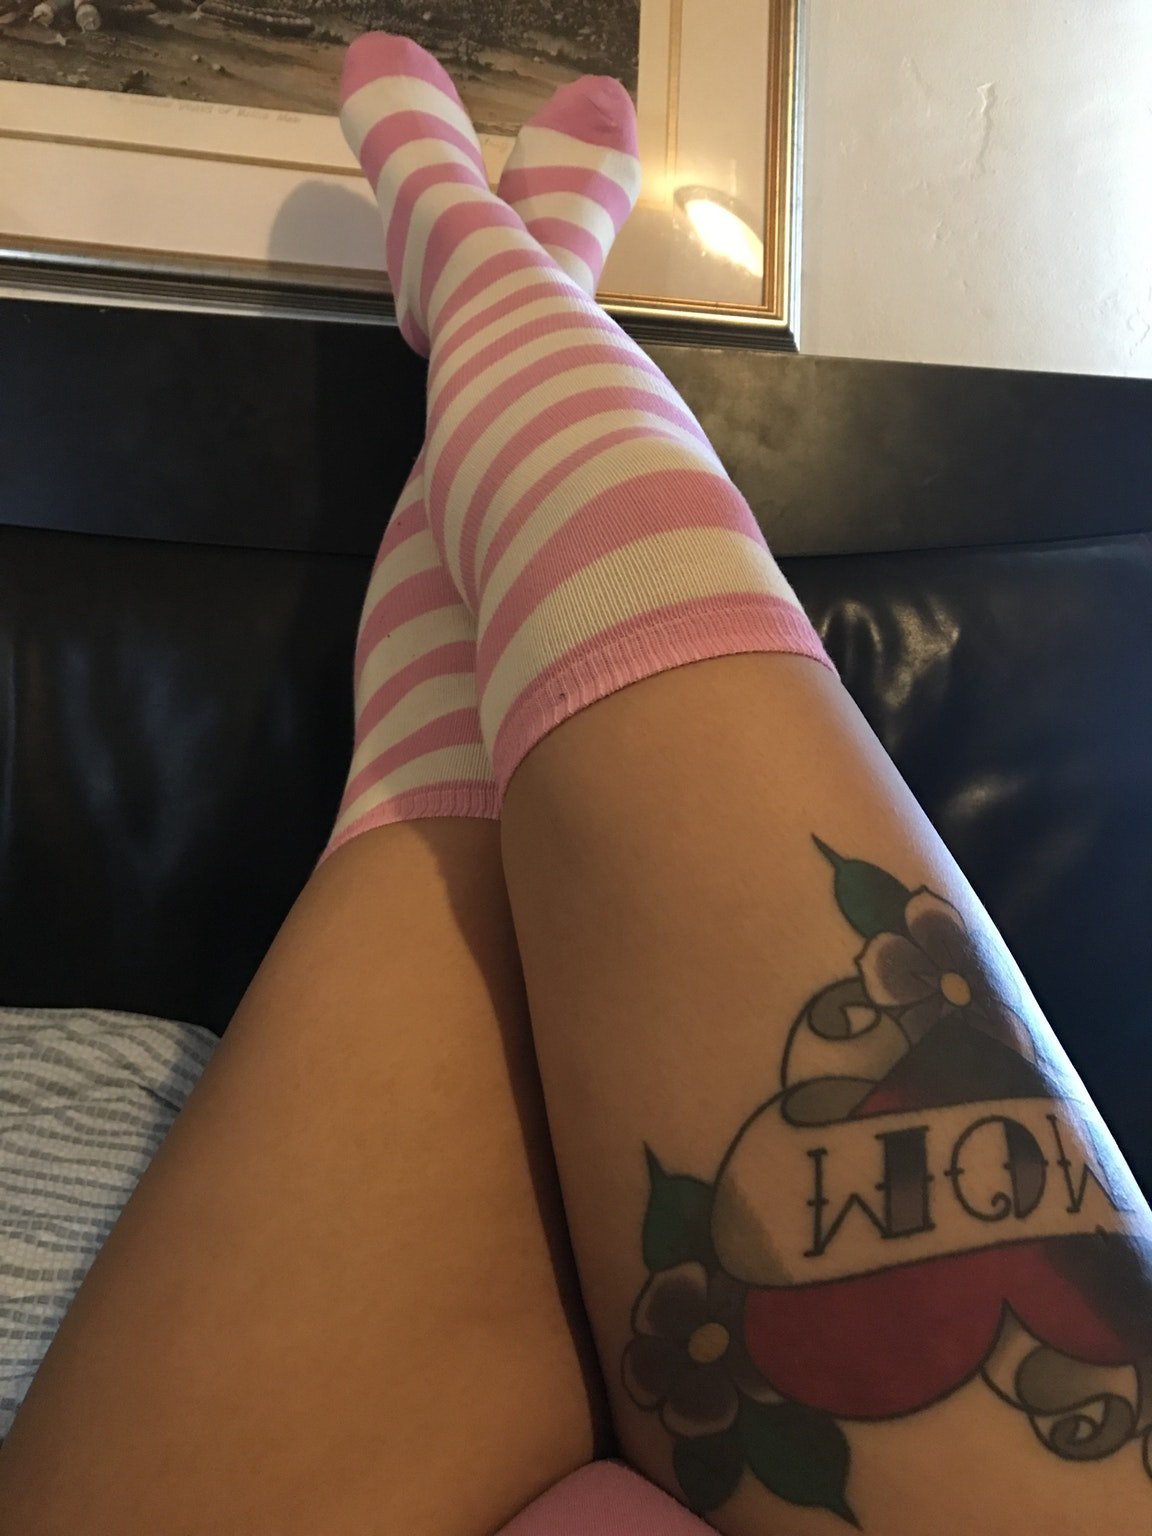 Happy [F]riday!! My pink and white pair for your viewing pleasure